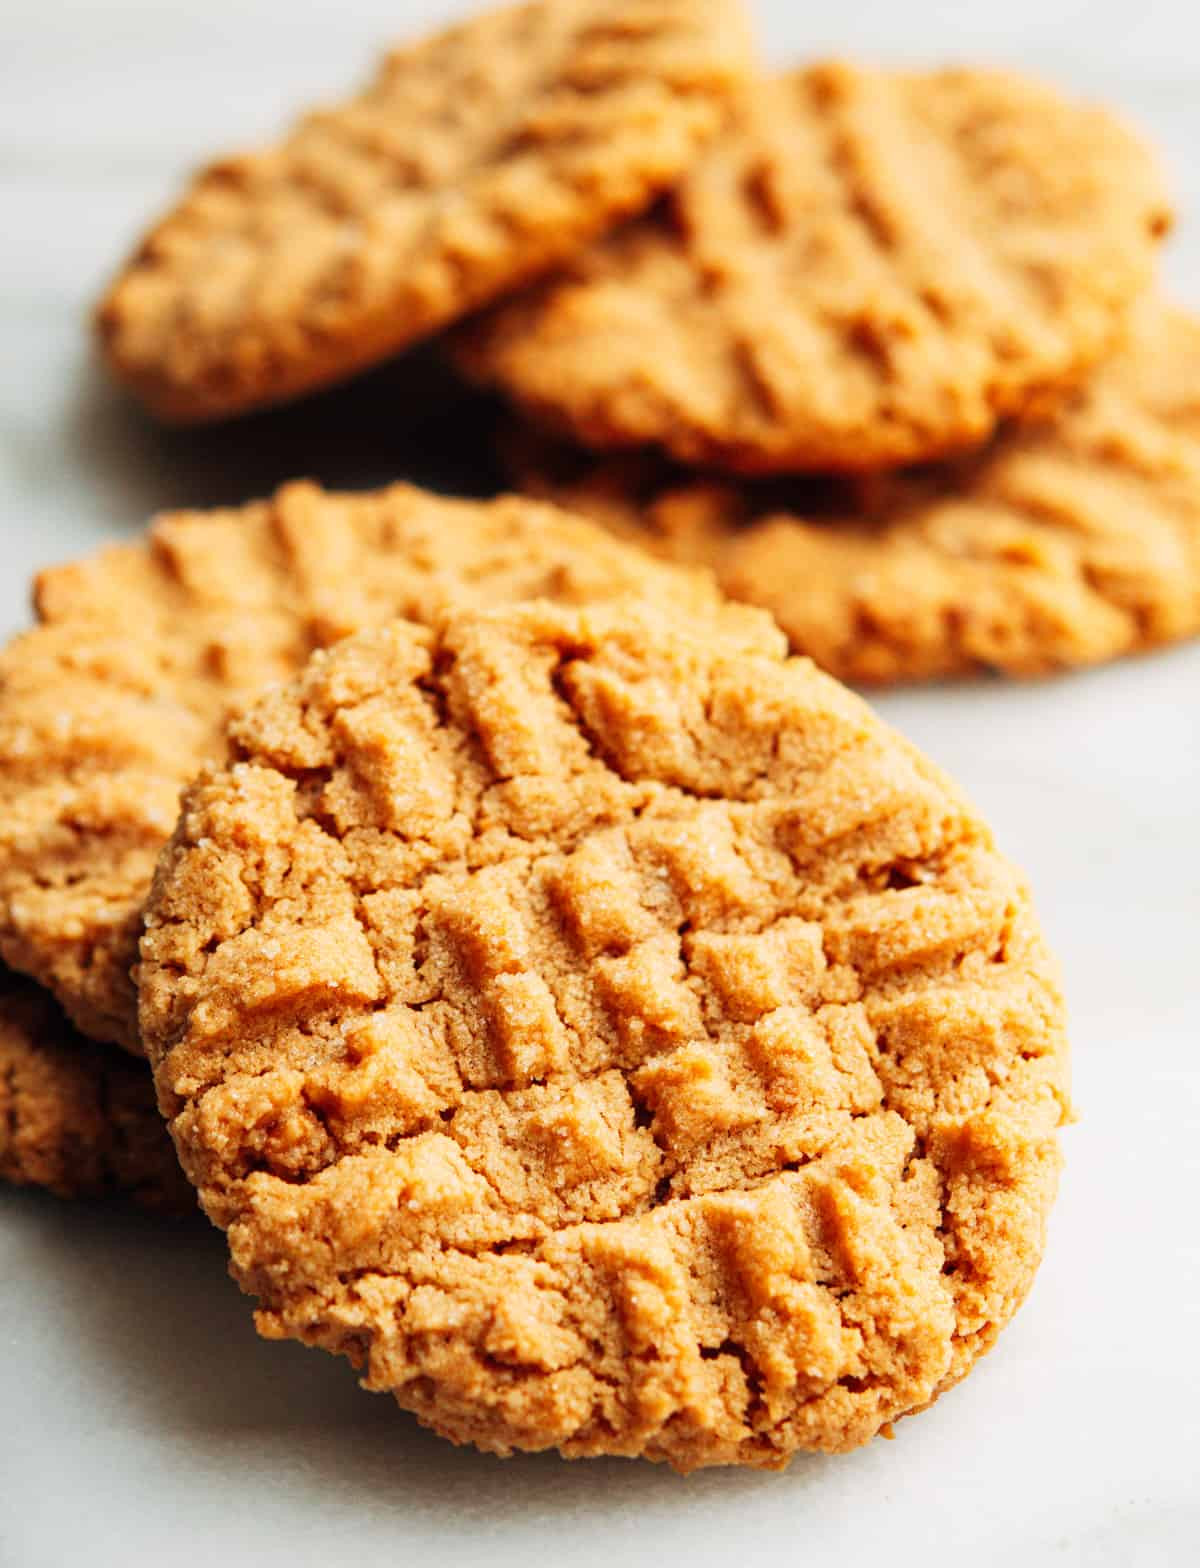 Peanut butter Cookies with Almond Flour Luxury Almond Flour Peanut butter Cookies Gluten Free Pinch